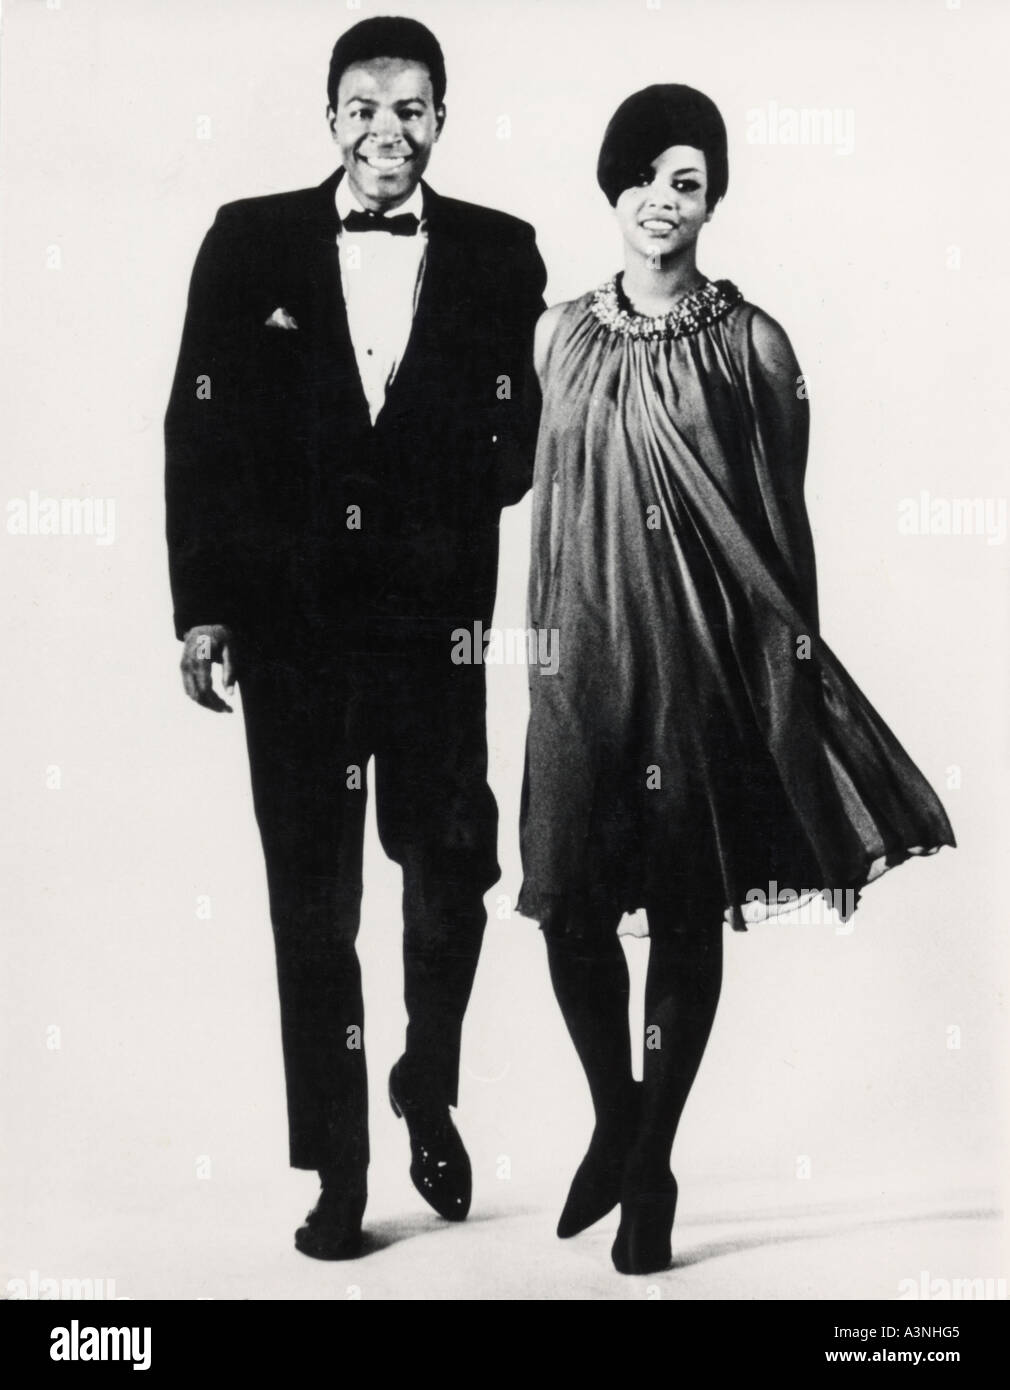 MARVIN GAYE and TAMMI TERRELL  Tamla Motown singers about 1967 Stock Photo